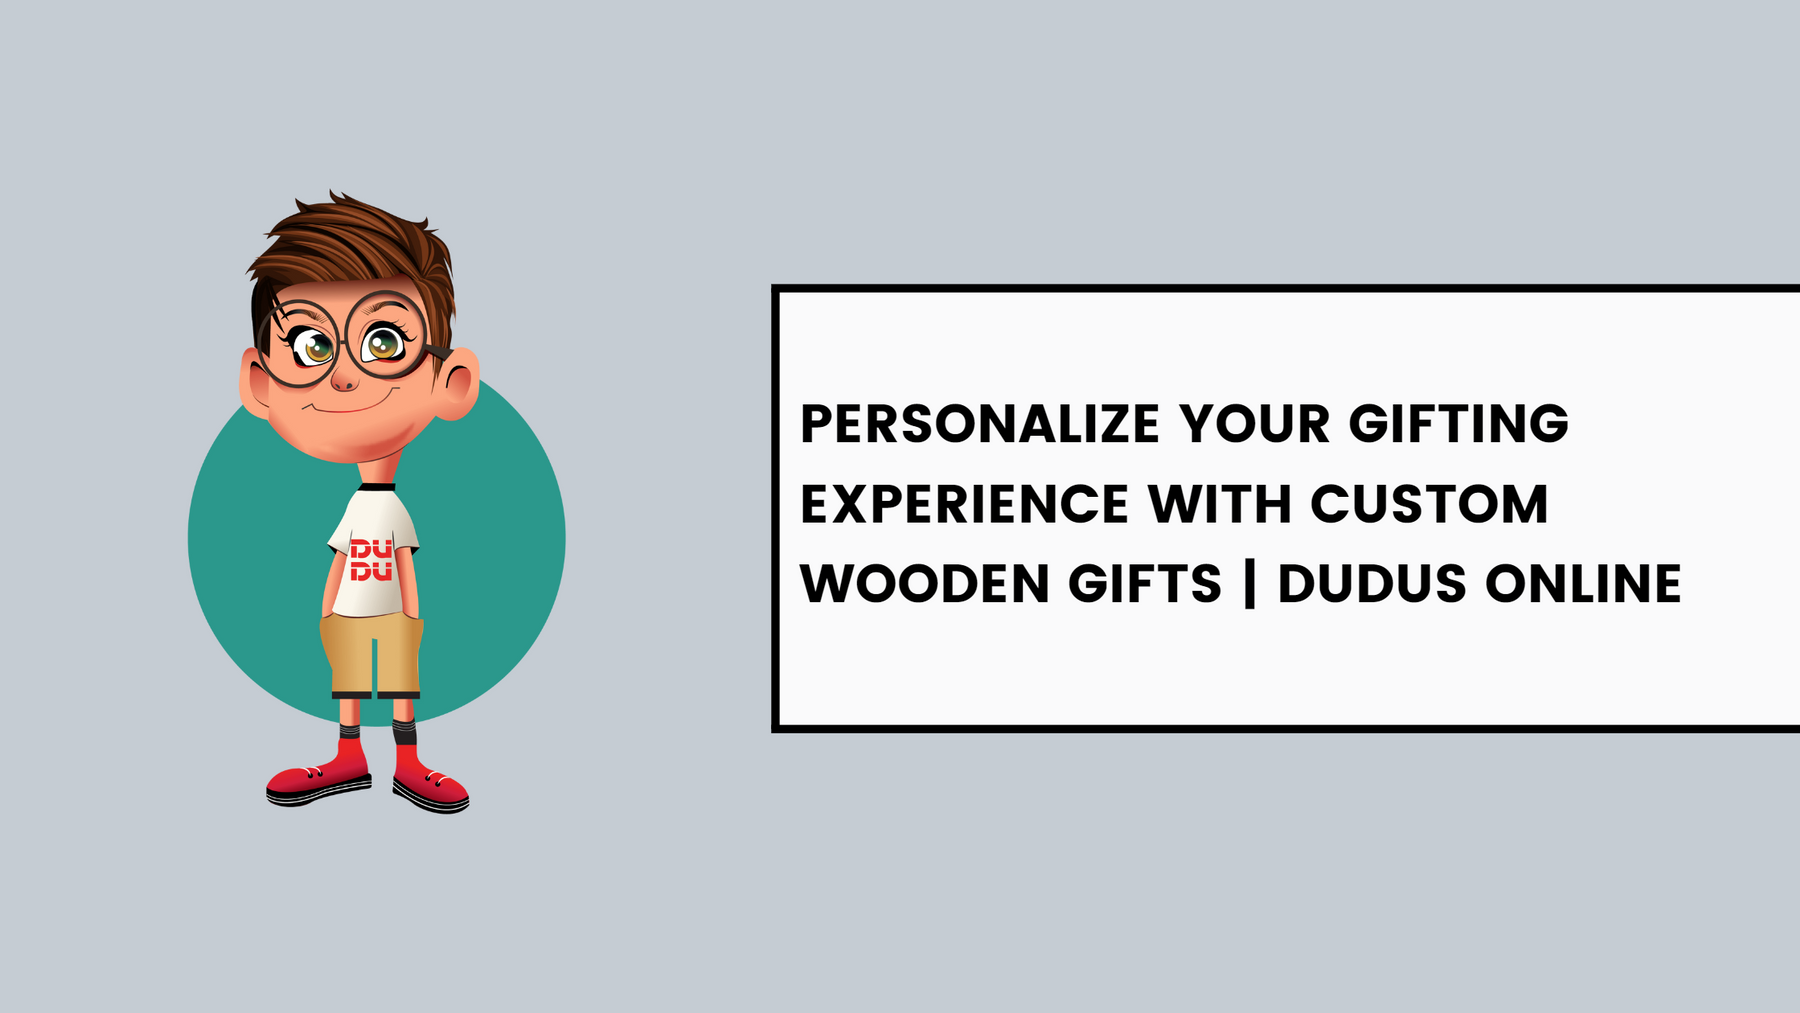 Personalize Your Gifting Experience with Custom Wooden Gifts | Dudus Online